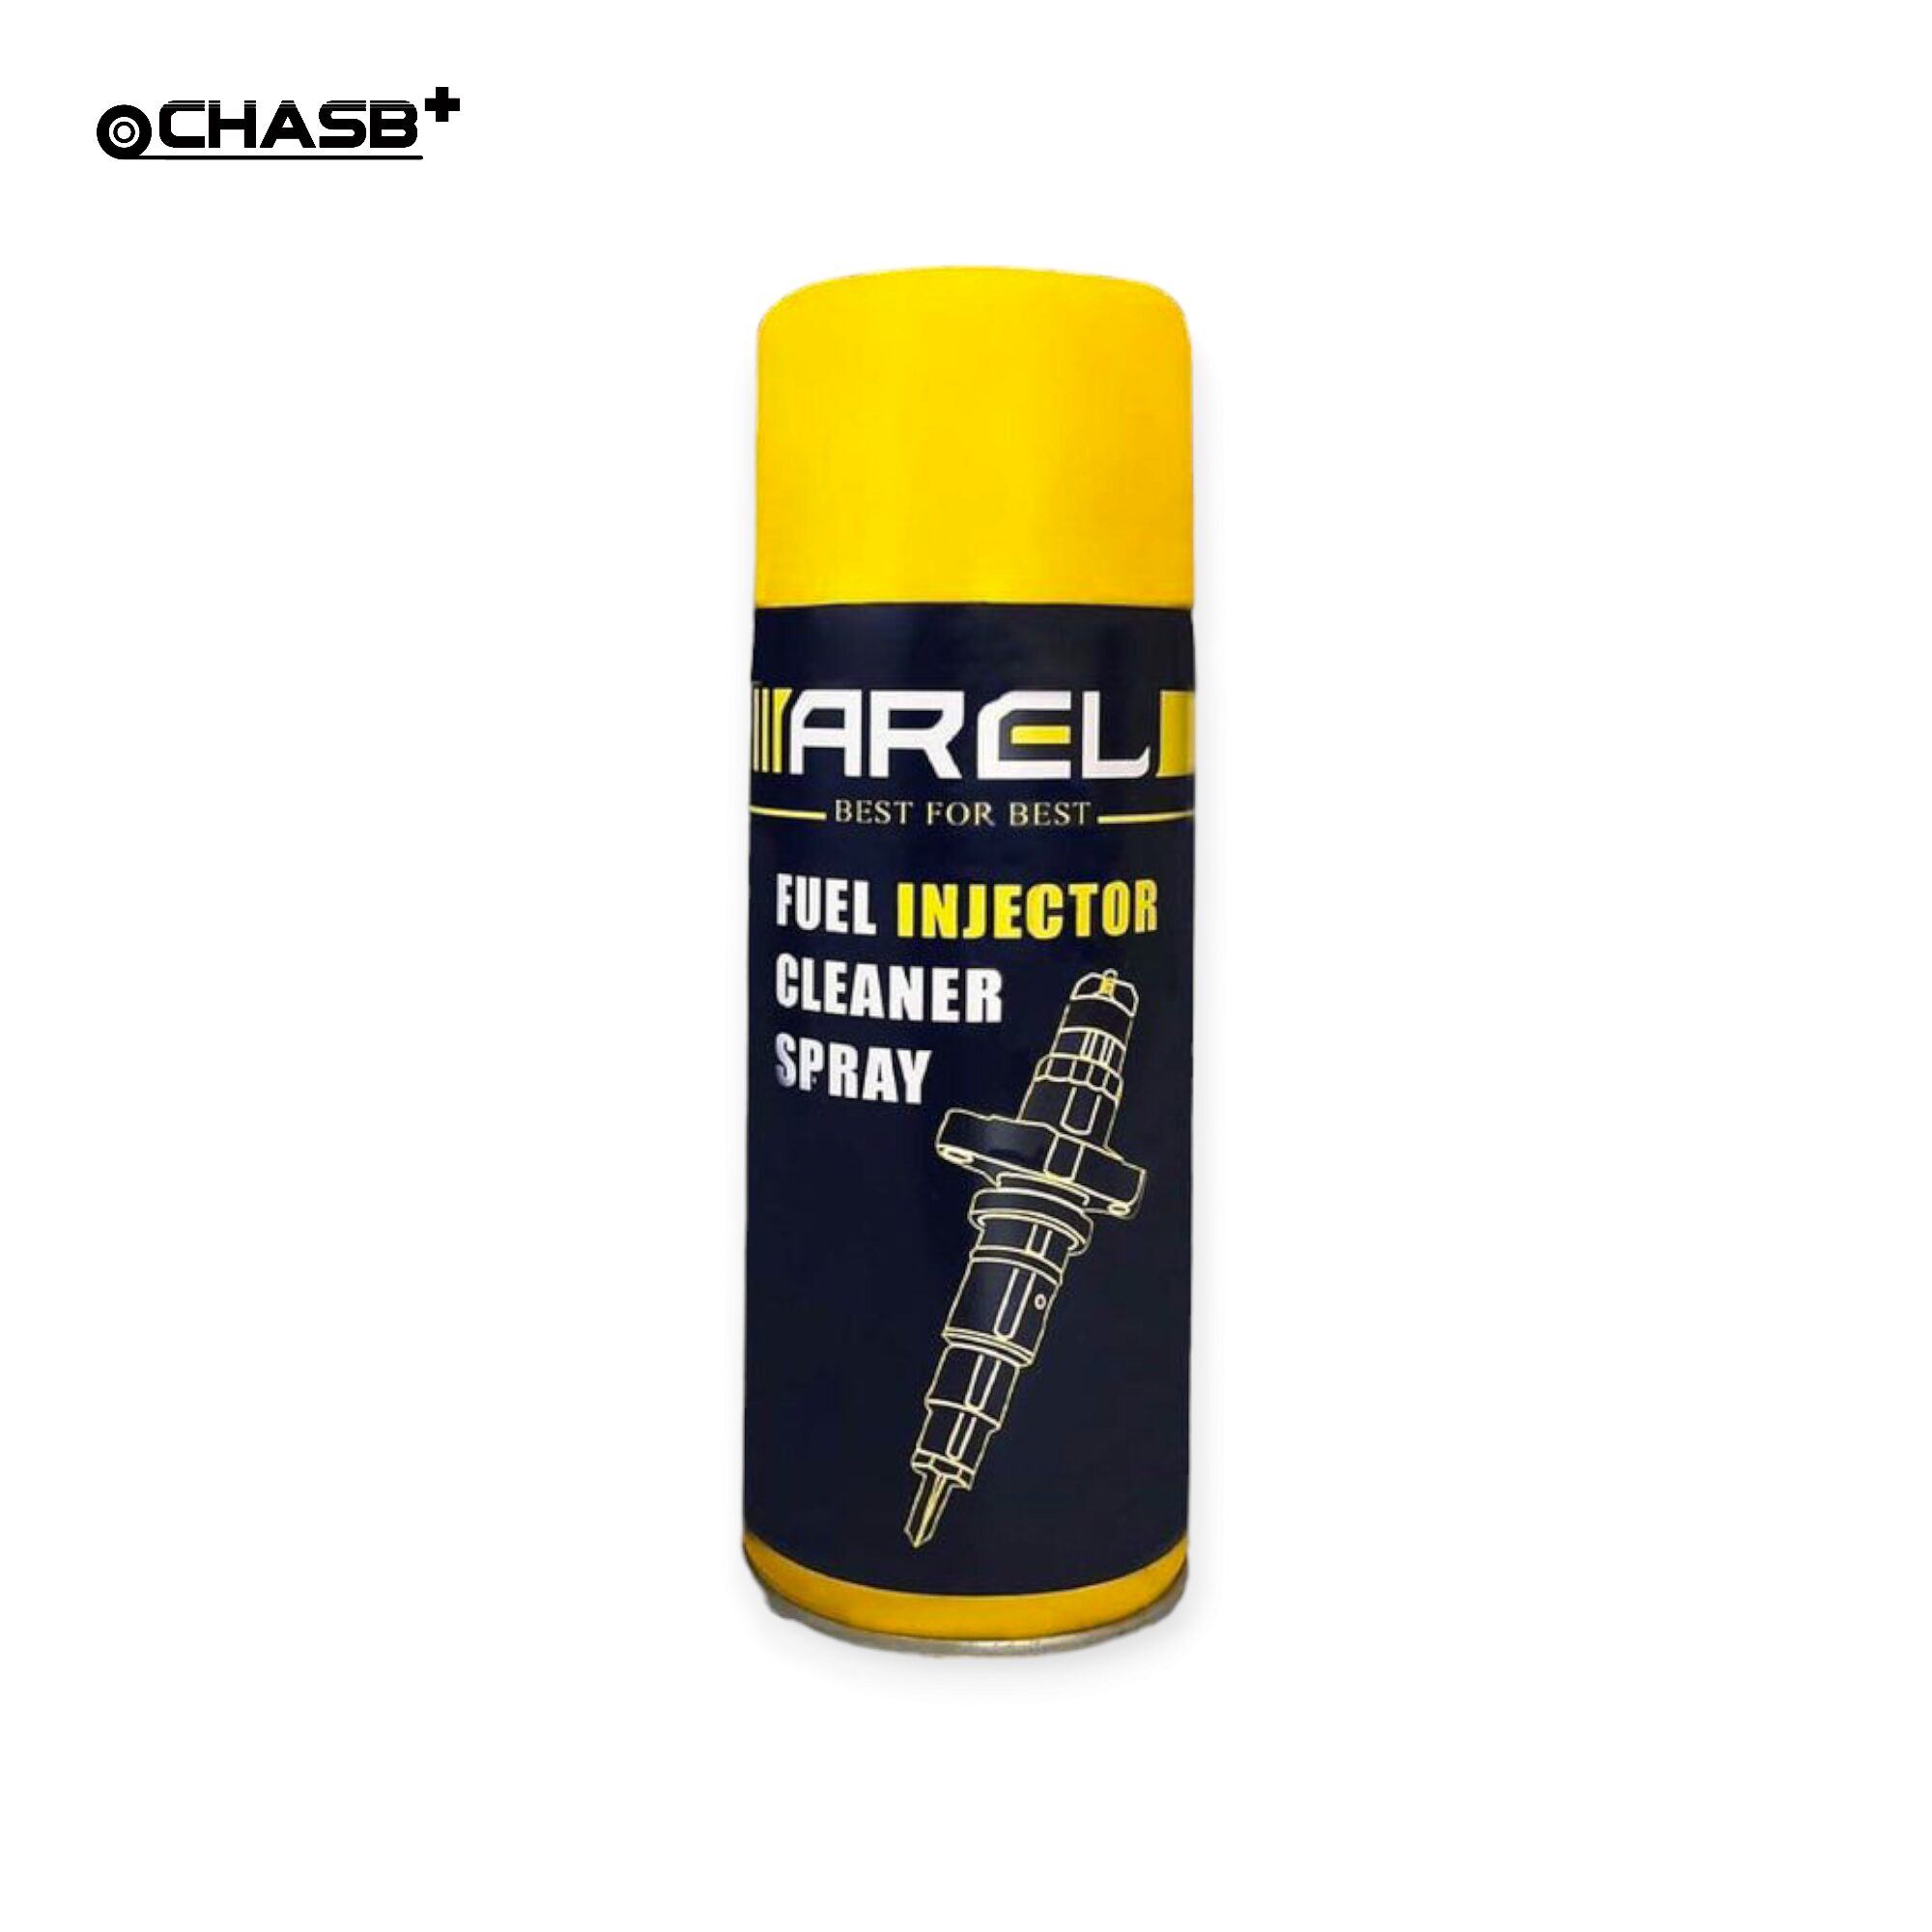 AREL FUEL INJECTOR CLEANER SPRAY